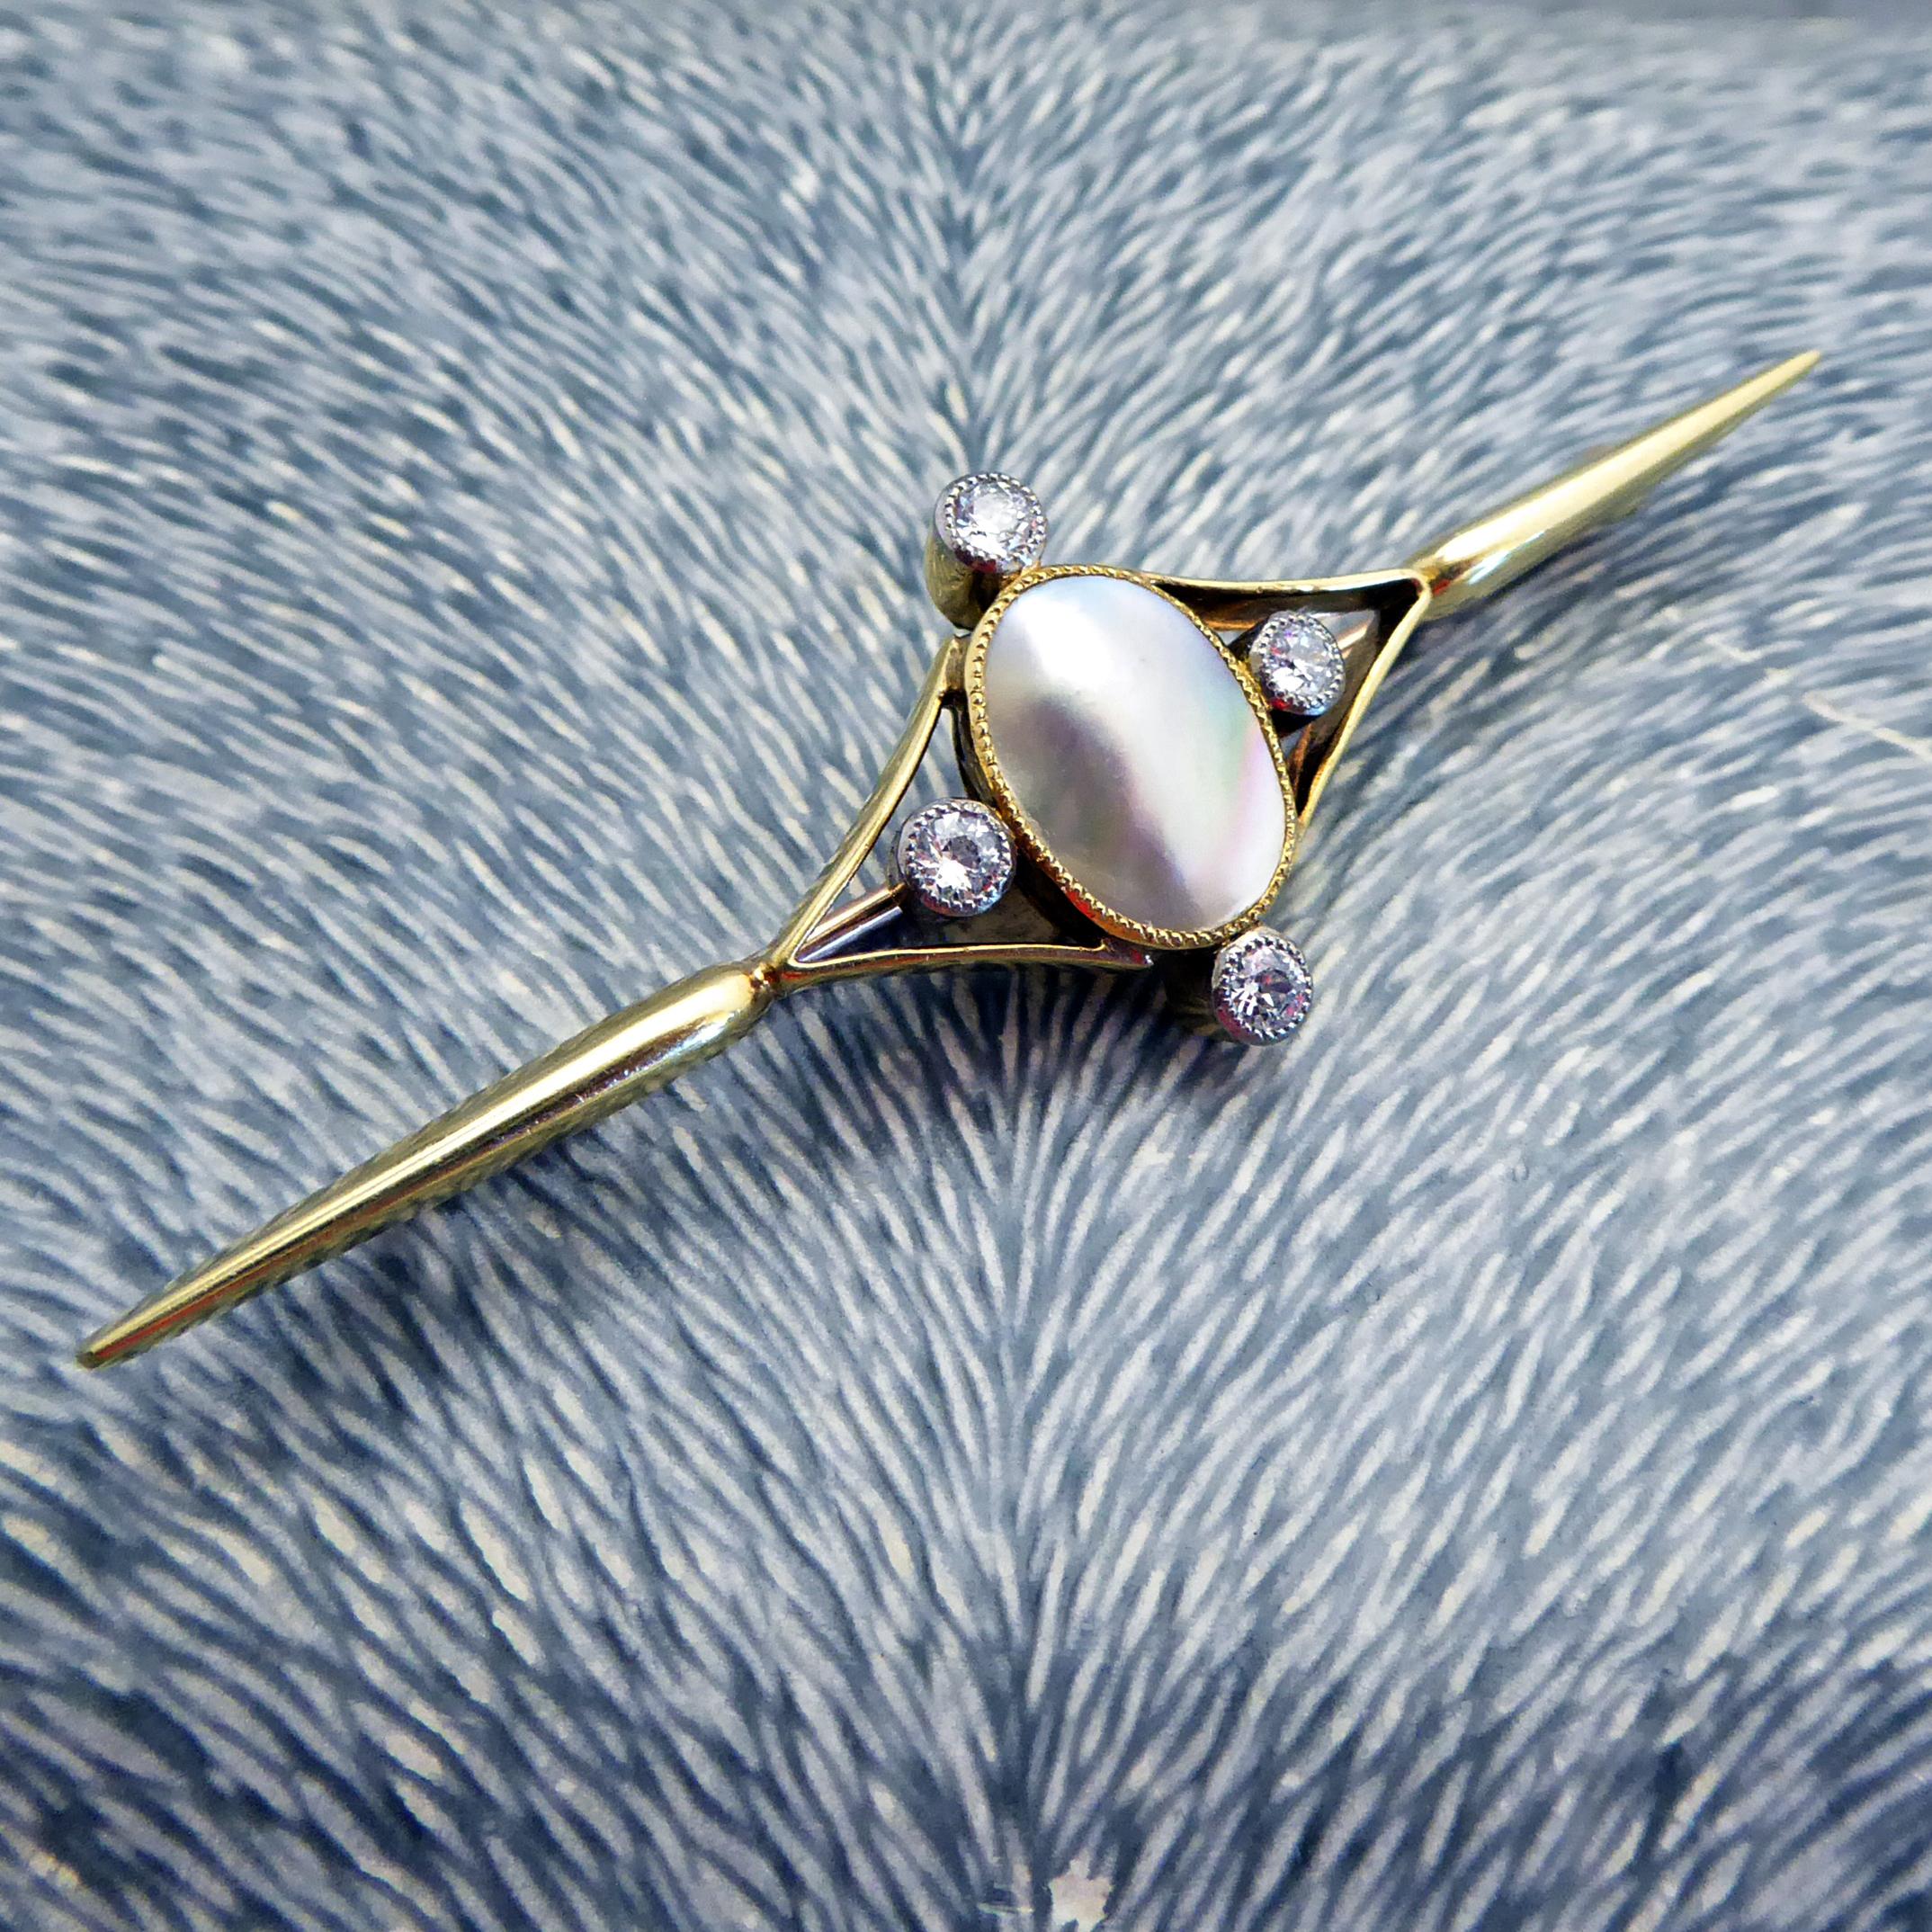 An exquisite pearl and diamond brooch in the Art Nouveau style.  A Mabe pearl measuring some 11.00mm x 8.00mm is in a millegrain edged mount to the centre of a marquise shaped open panel.  Evenly spaced around the pearl are four old diamonds, each